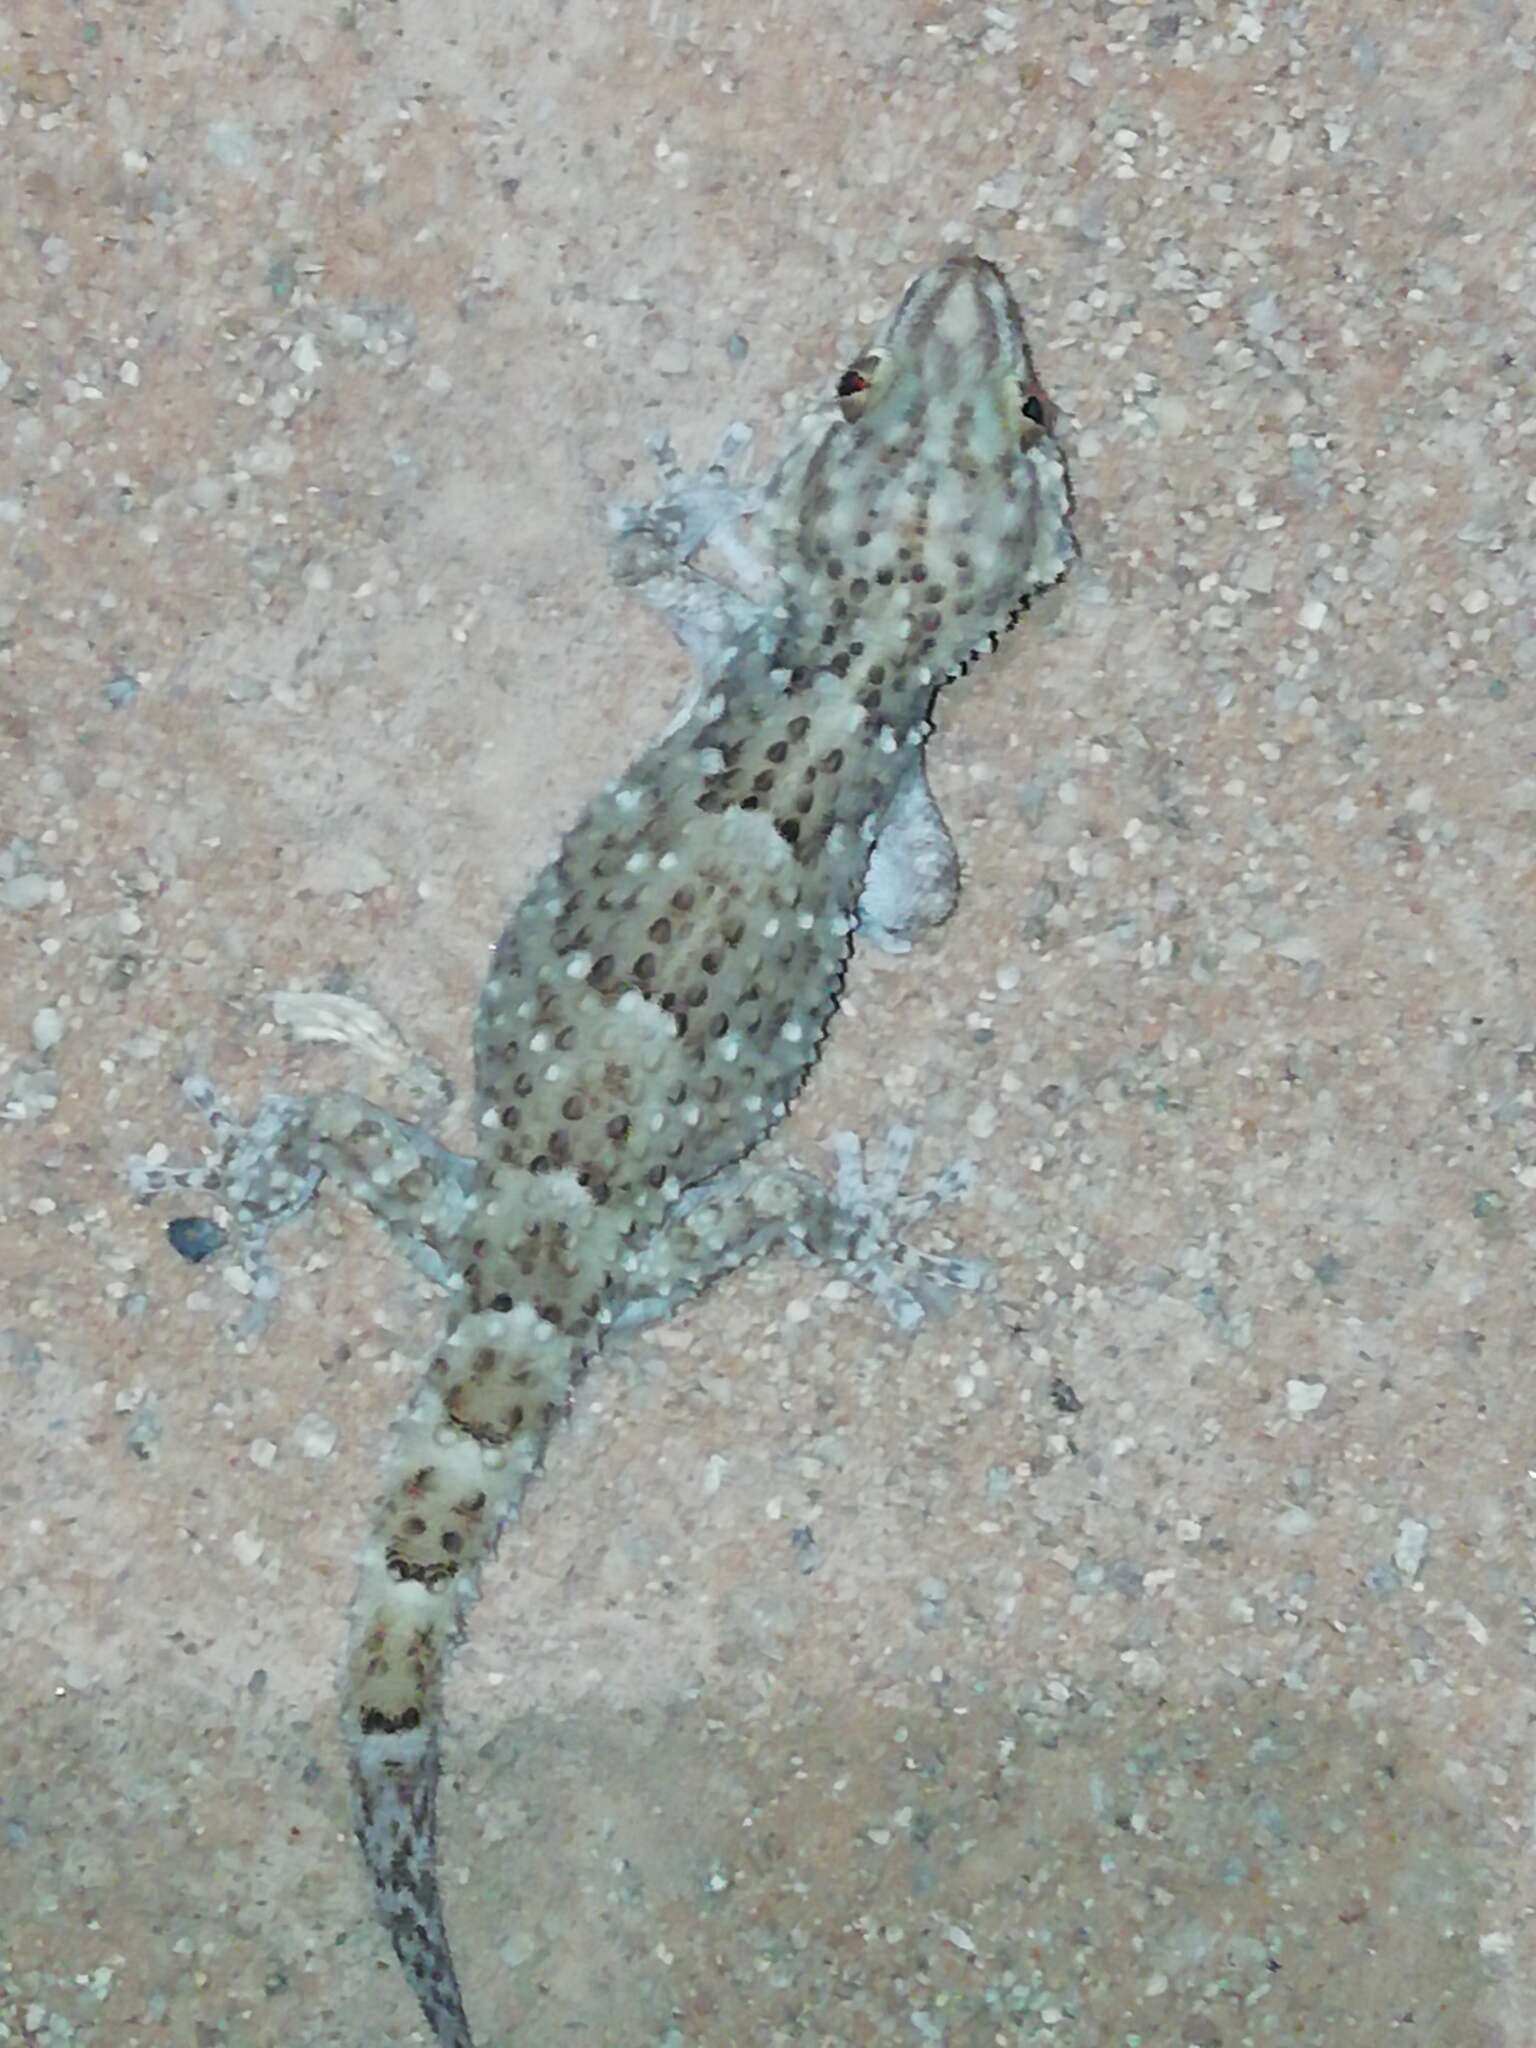 Image of Fischer's Thick-toed Gecko